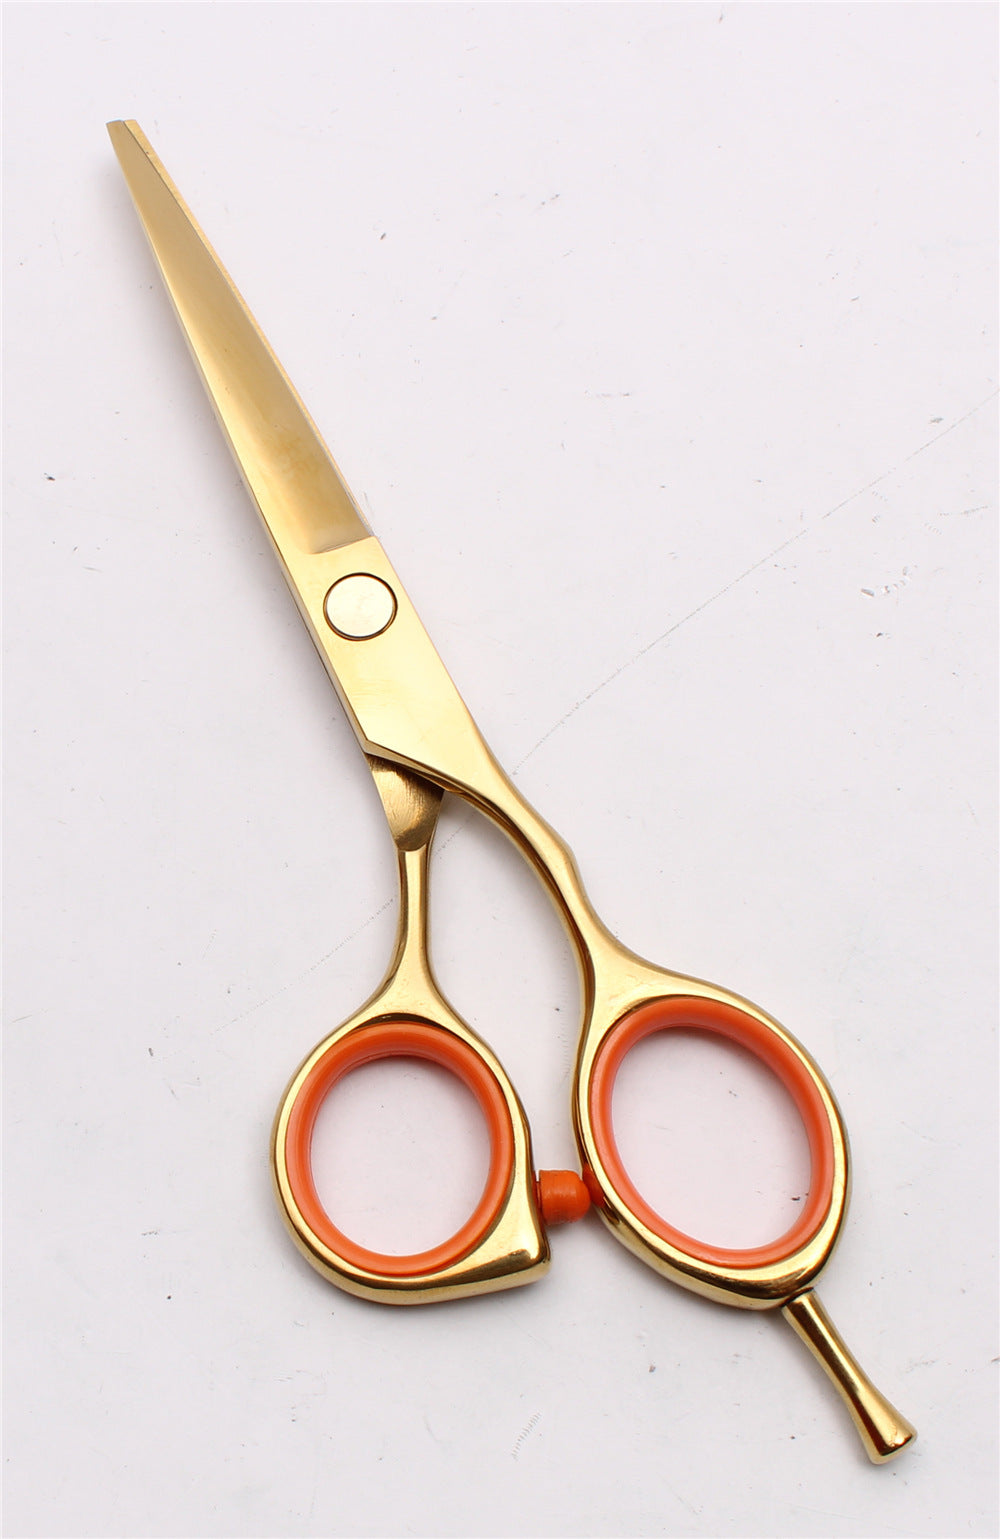 Thinning or simple professional hairdressing scissors